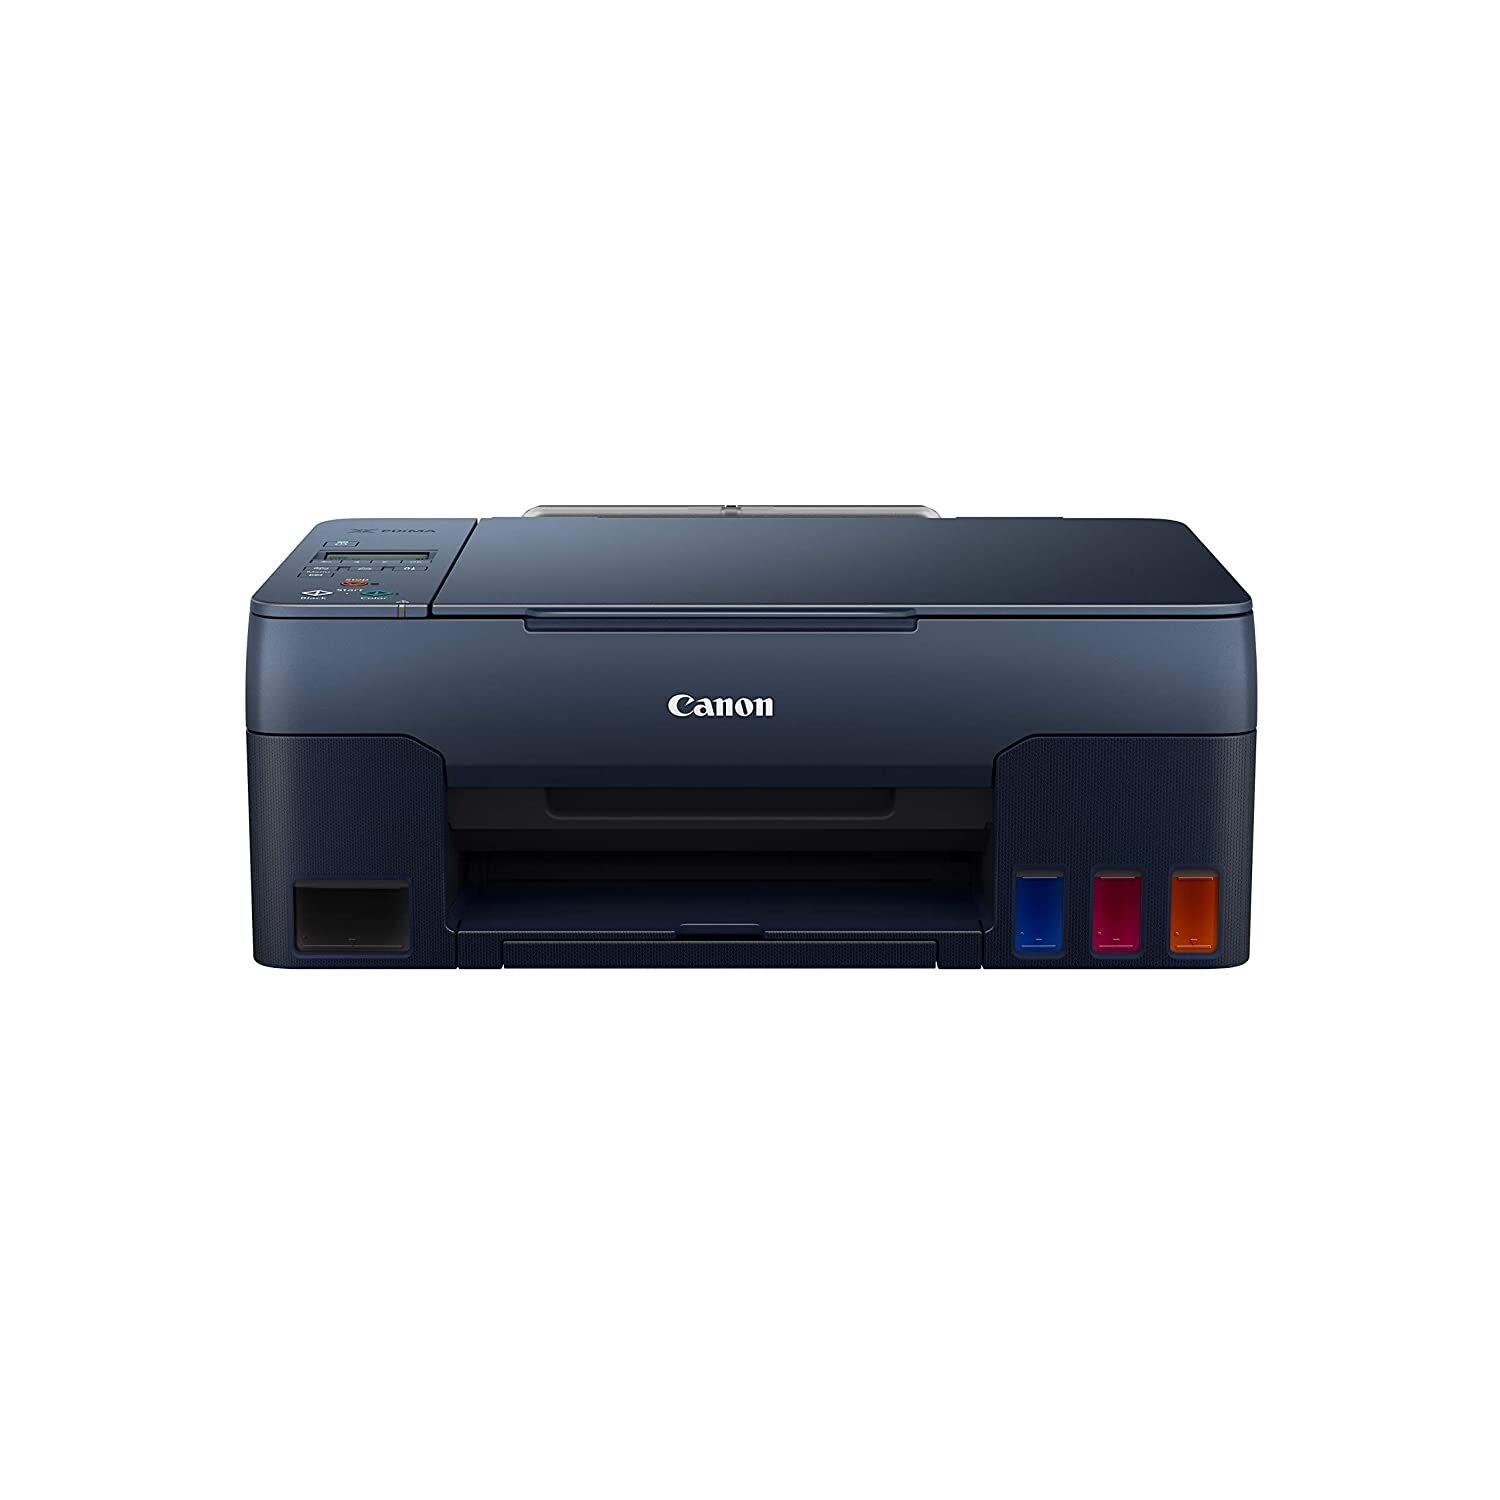 Canon PIXMA G2020 All-in-One Ink Tank Printer